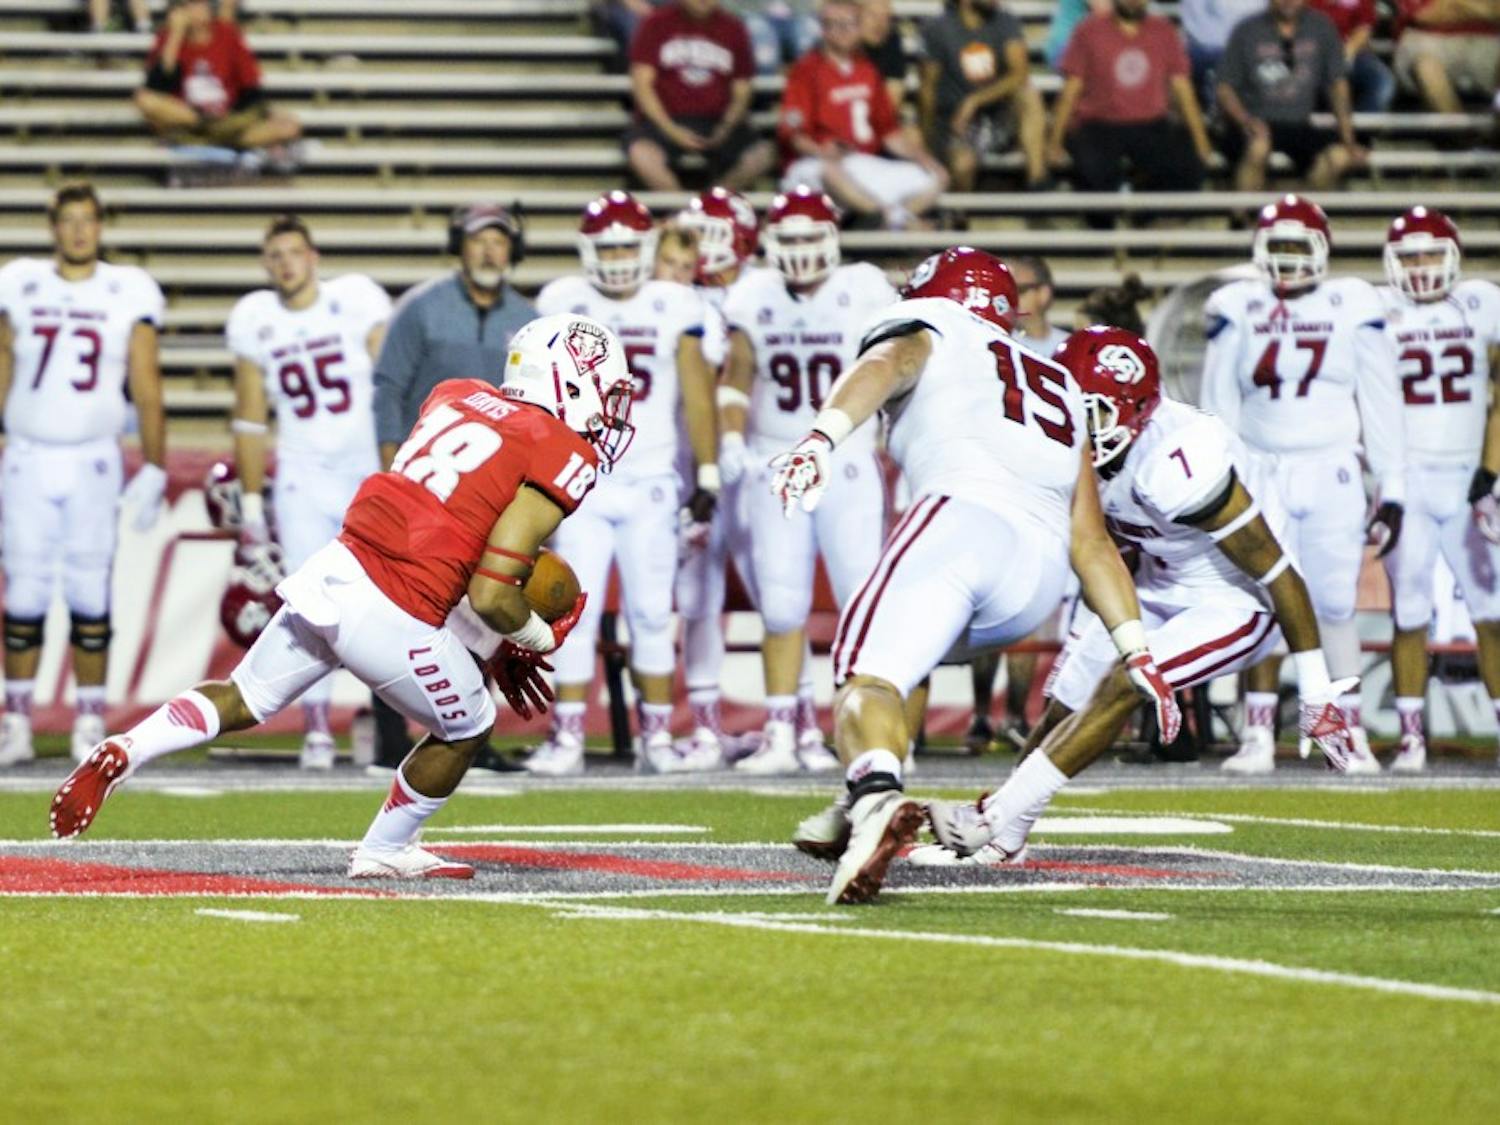 Junior wide receiver Chris Davis, Jr. runs the ball downfield Thursday, Sept. 1, 2016 at University Stadium. The Lobos’ special teams played a pivotal role in their 48-21 victory.